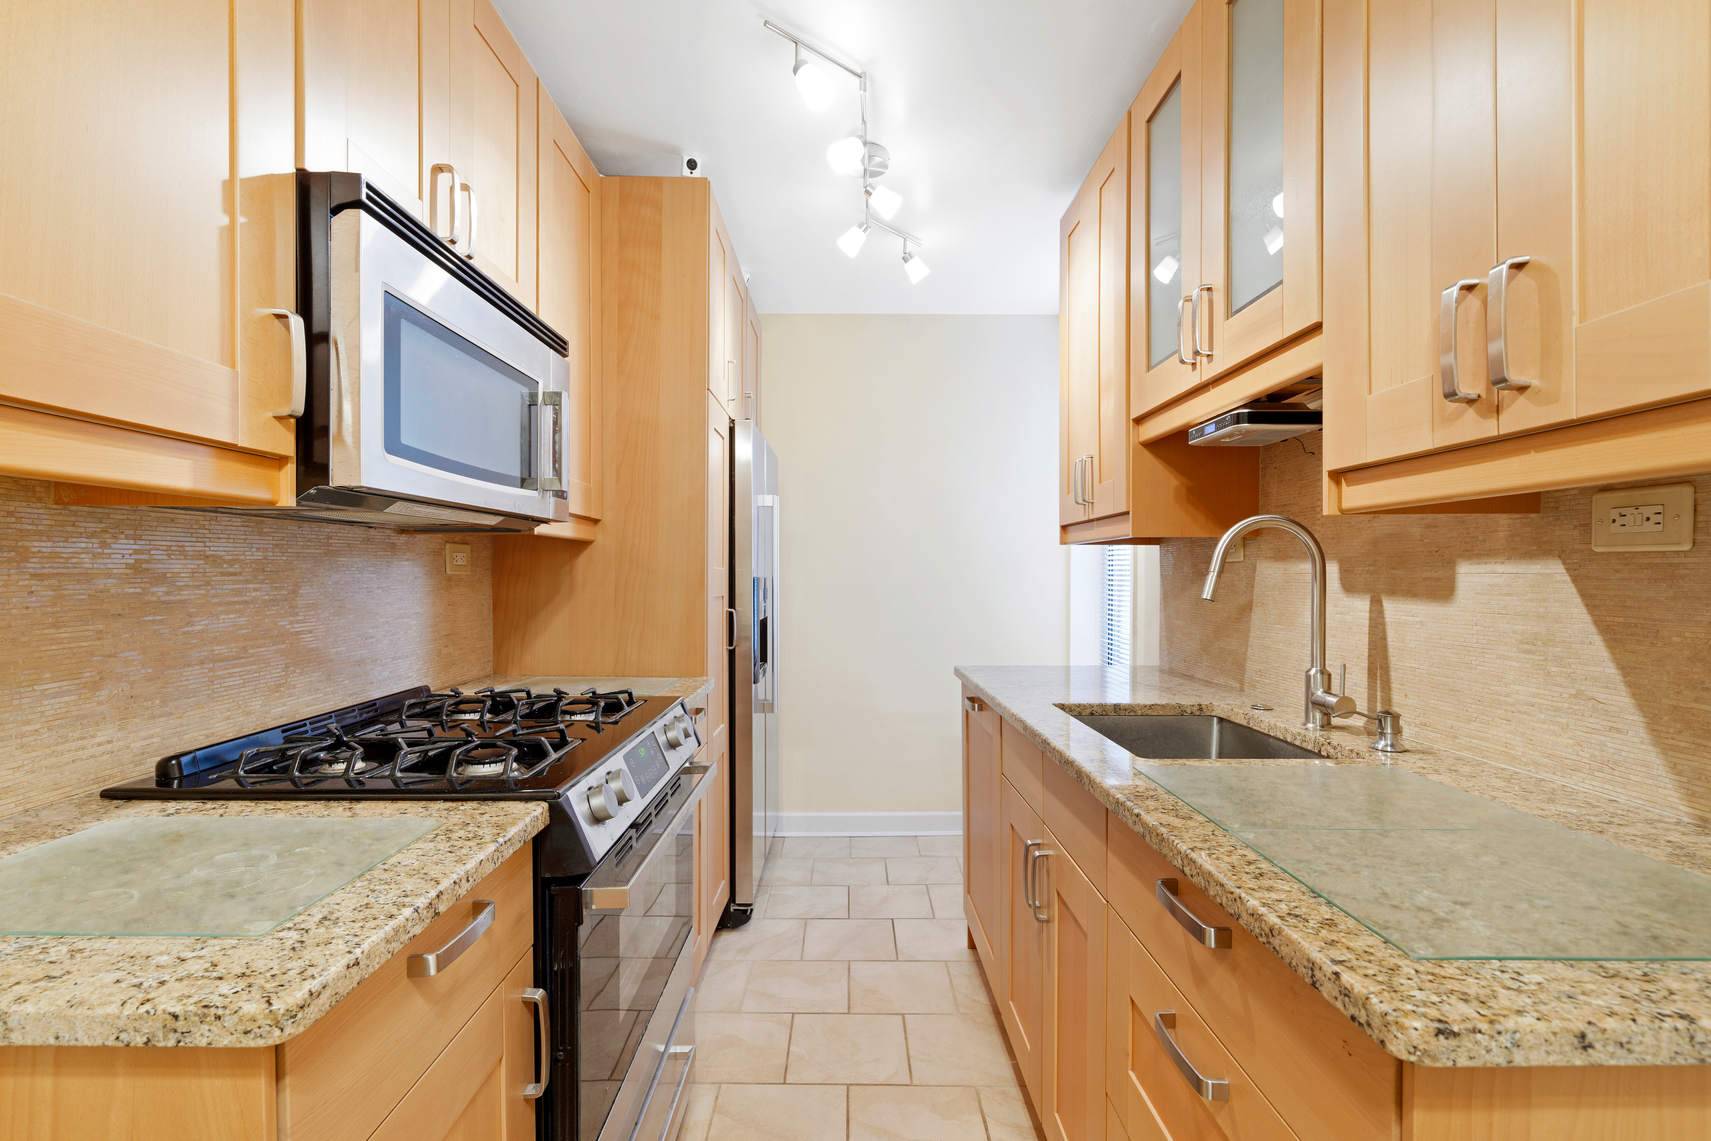 Have you been searching for an affordable, fully renovated corner apartment for under 400, 000 ?